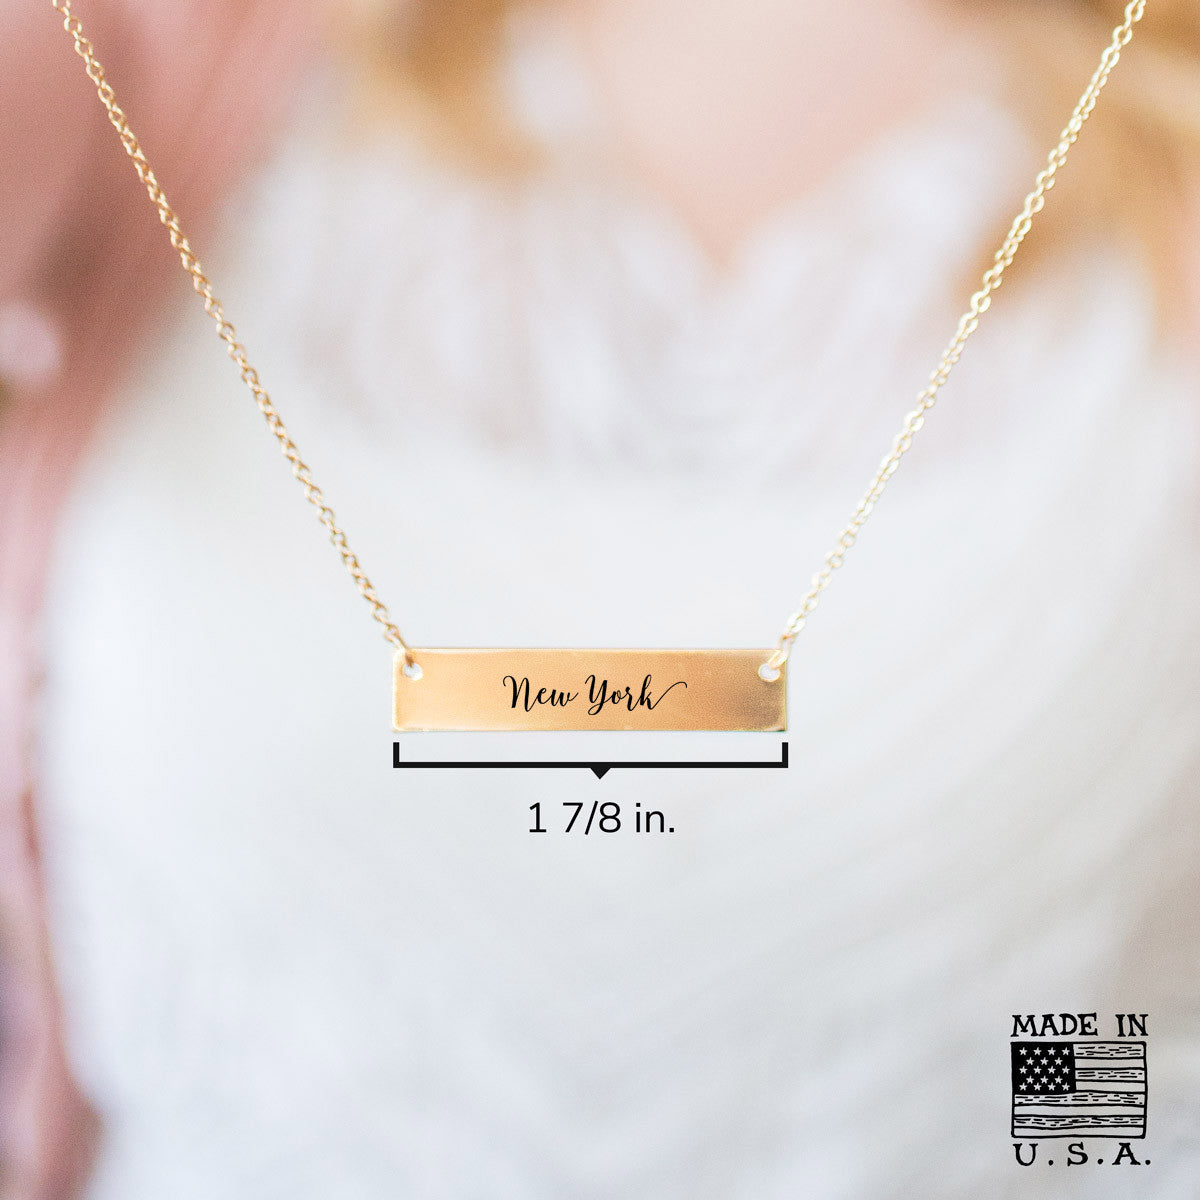 New York Gold / Silver Bar Necklace - pipercleo.com